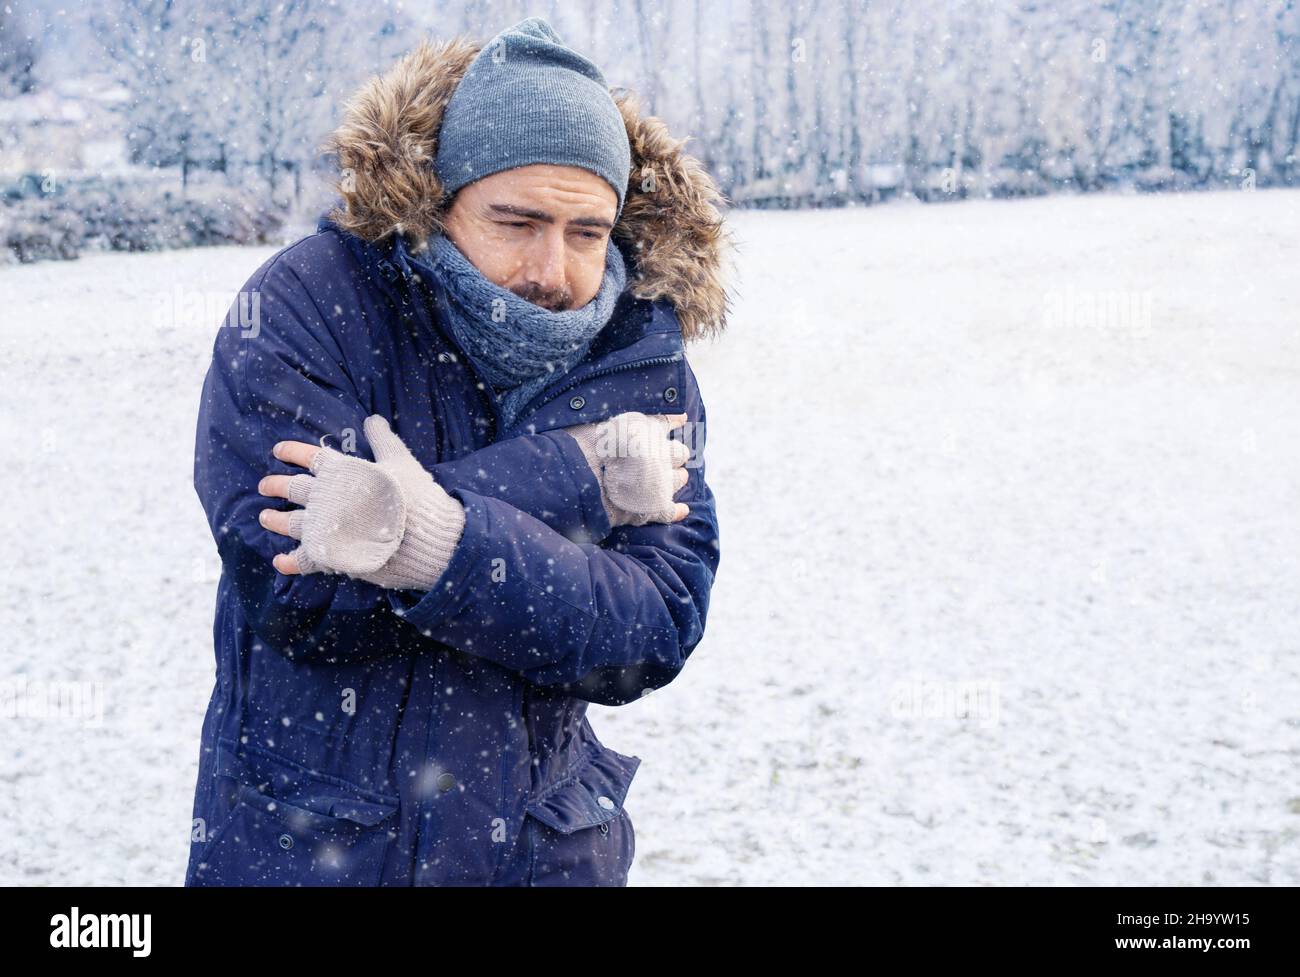 One man suffering and shivering because of cold weather Stock Photo